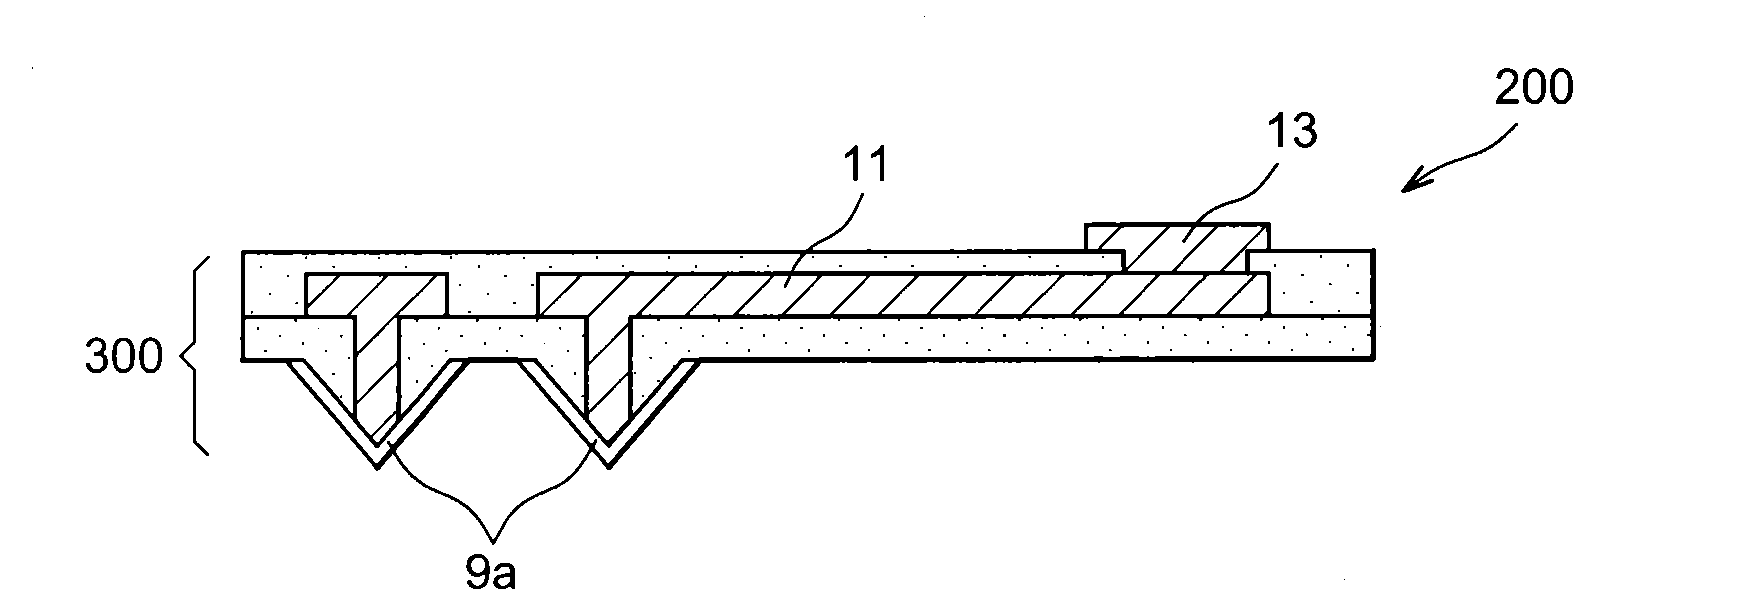 Method for manufacturing a flexible intraocular retinal implant having doped diamond electrodes